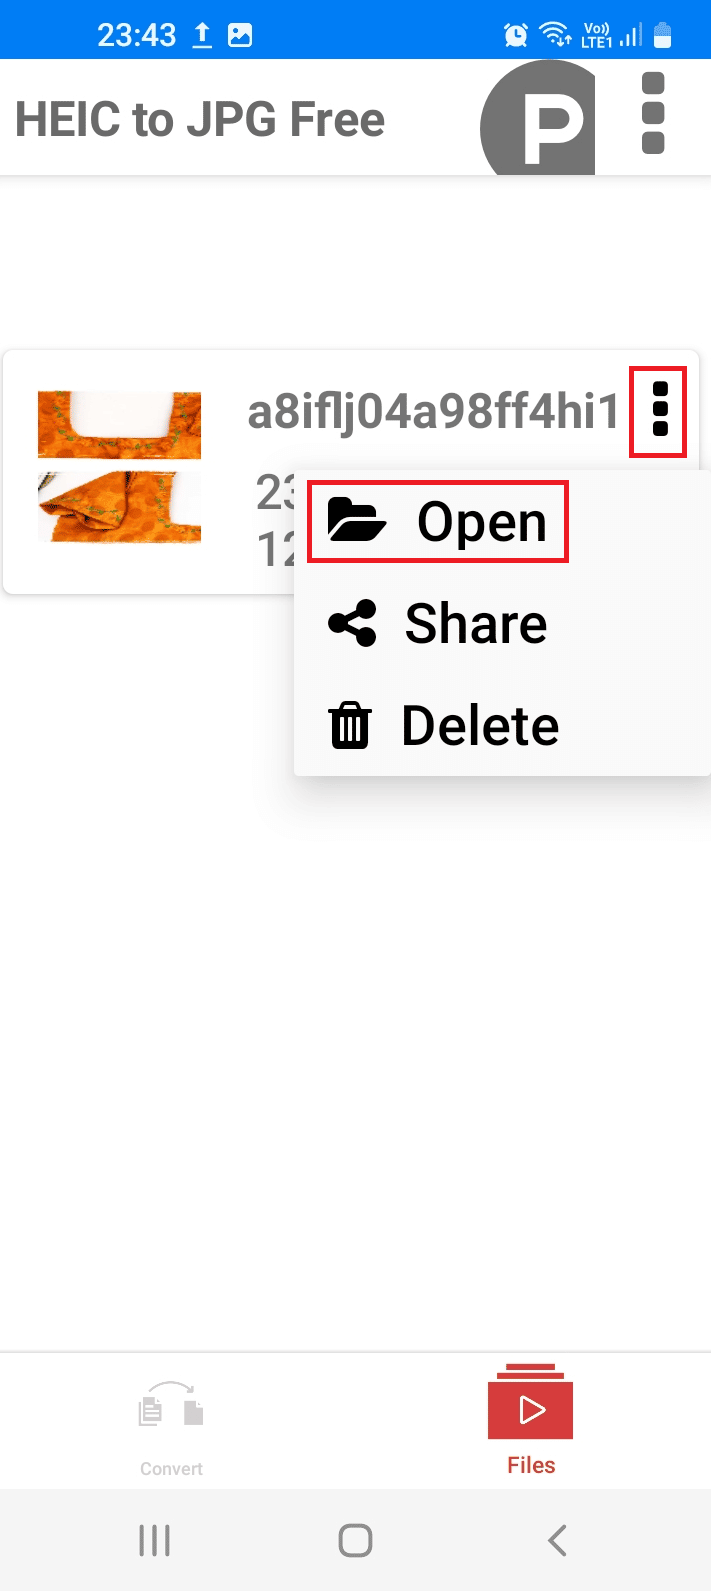 tap on the Open option. How to Convert HEIC to JPG on Android